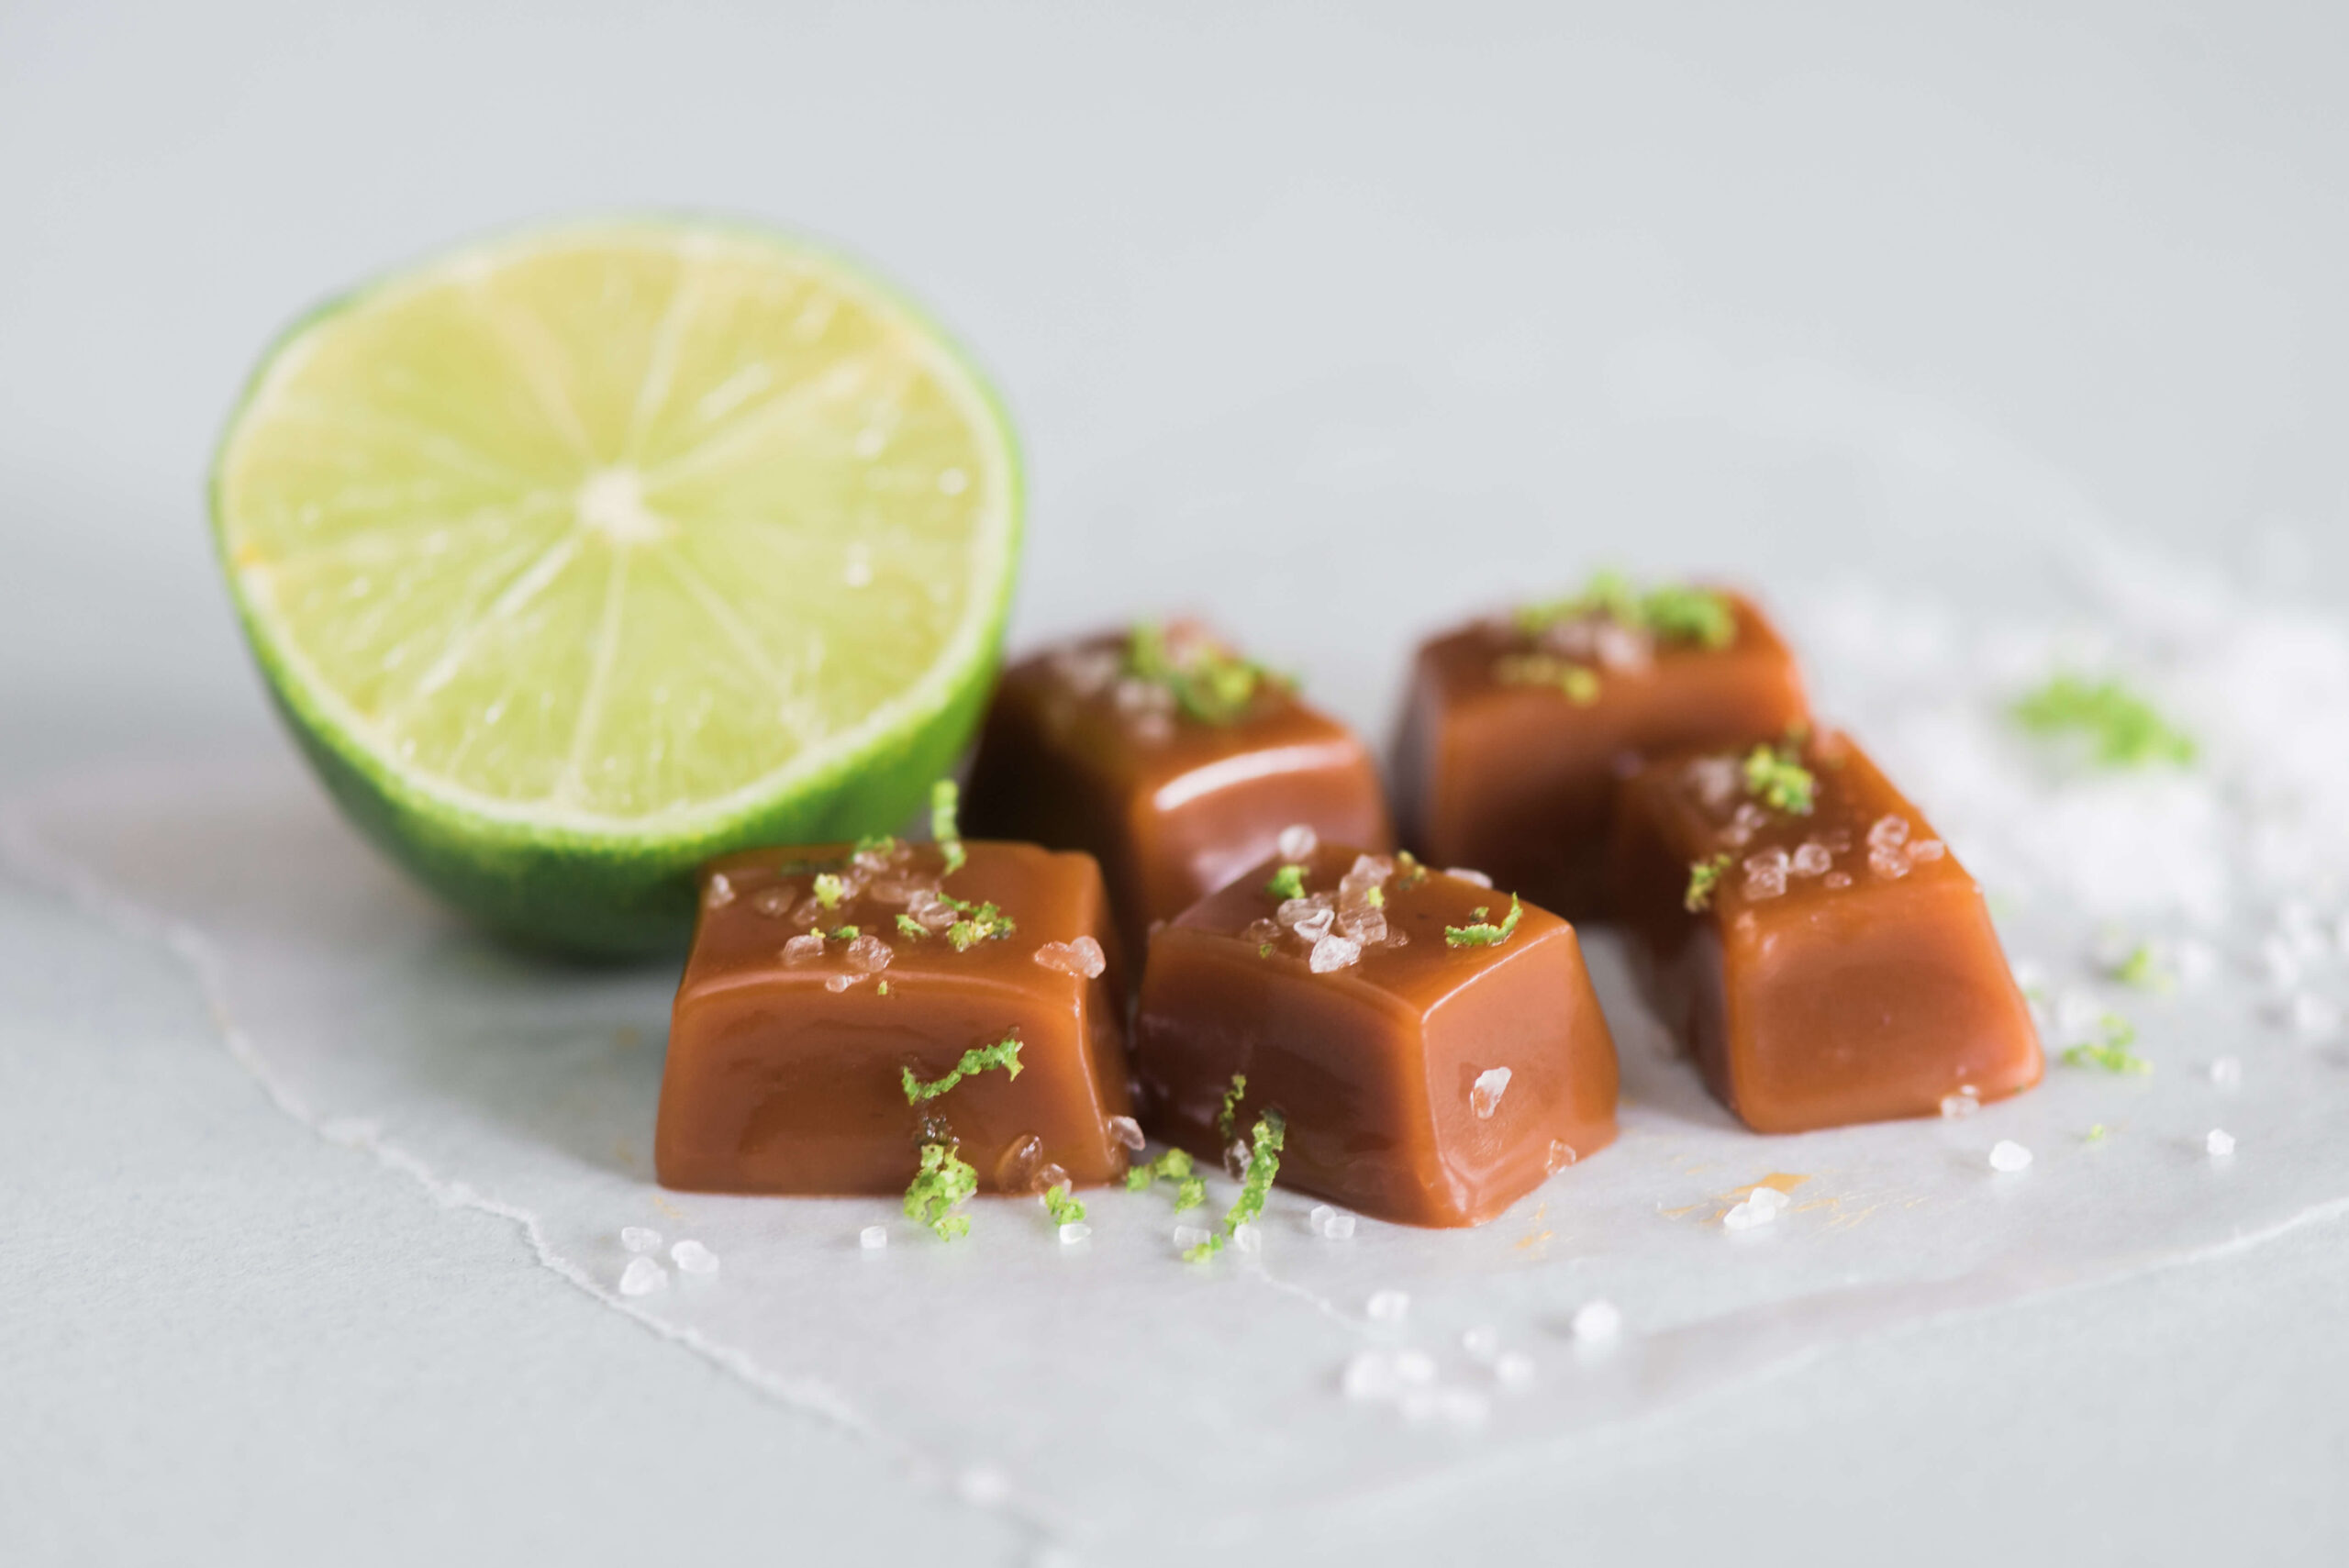 Southern Caramel candy pieces zested with lime